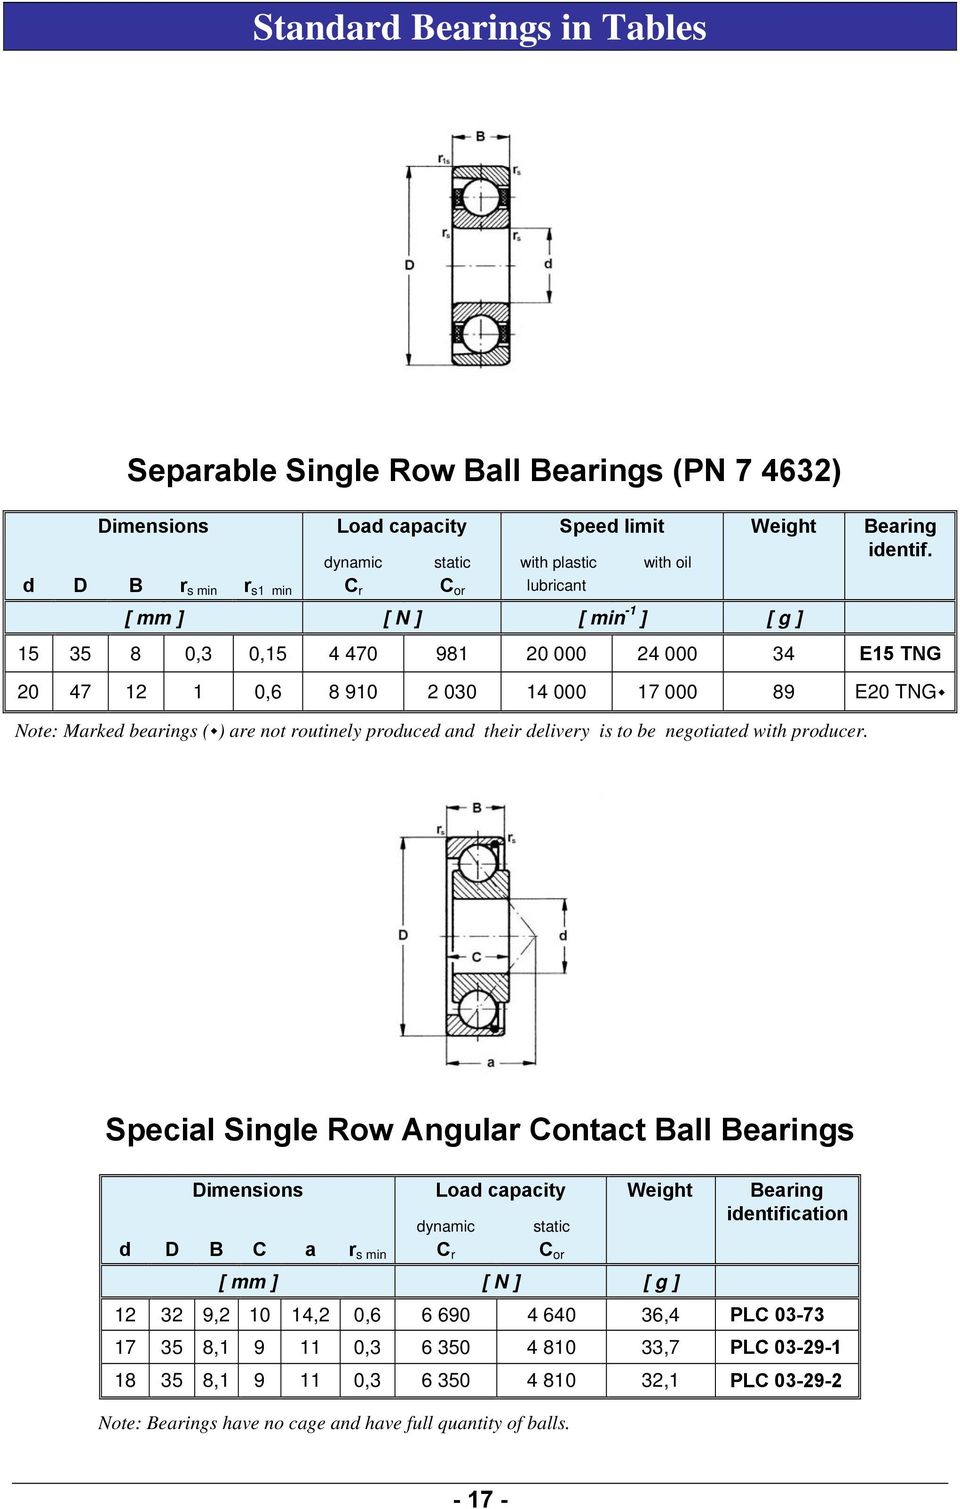 000 89 E20 TNG Note: Marked bearings ( ) are not routinely produced and their delivery is to be negotiated with producer.